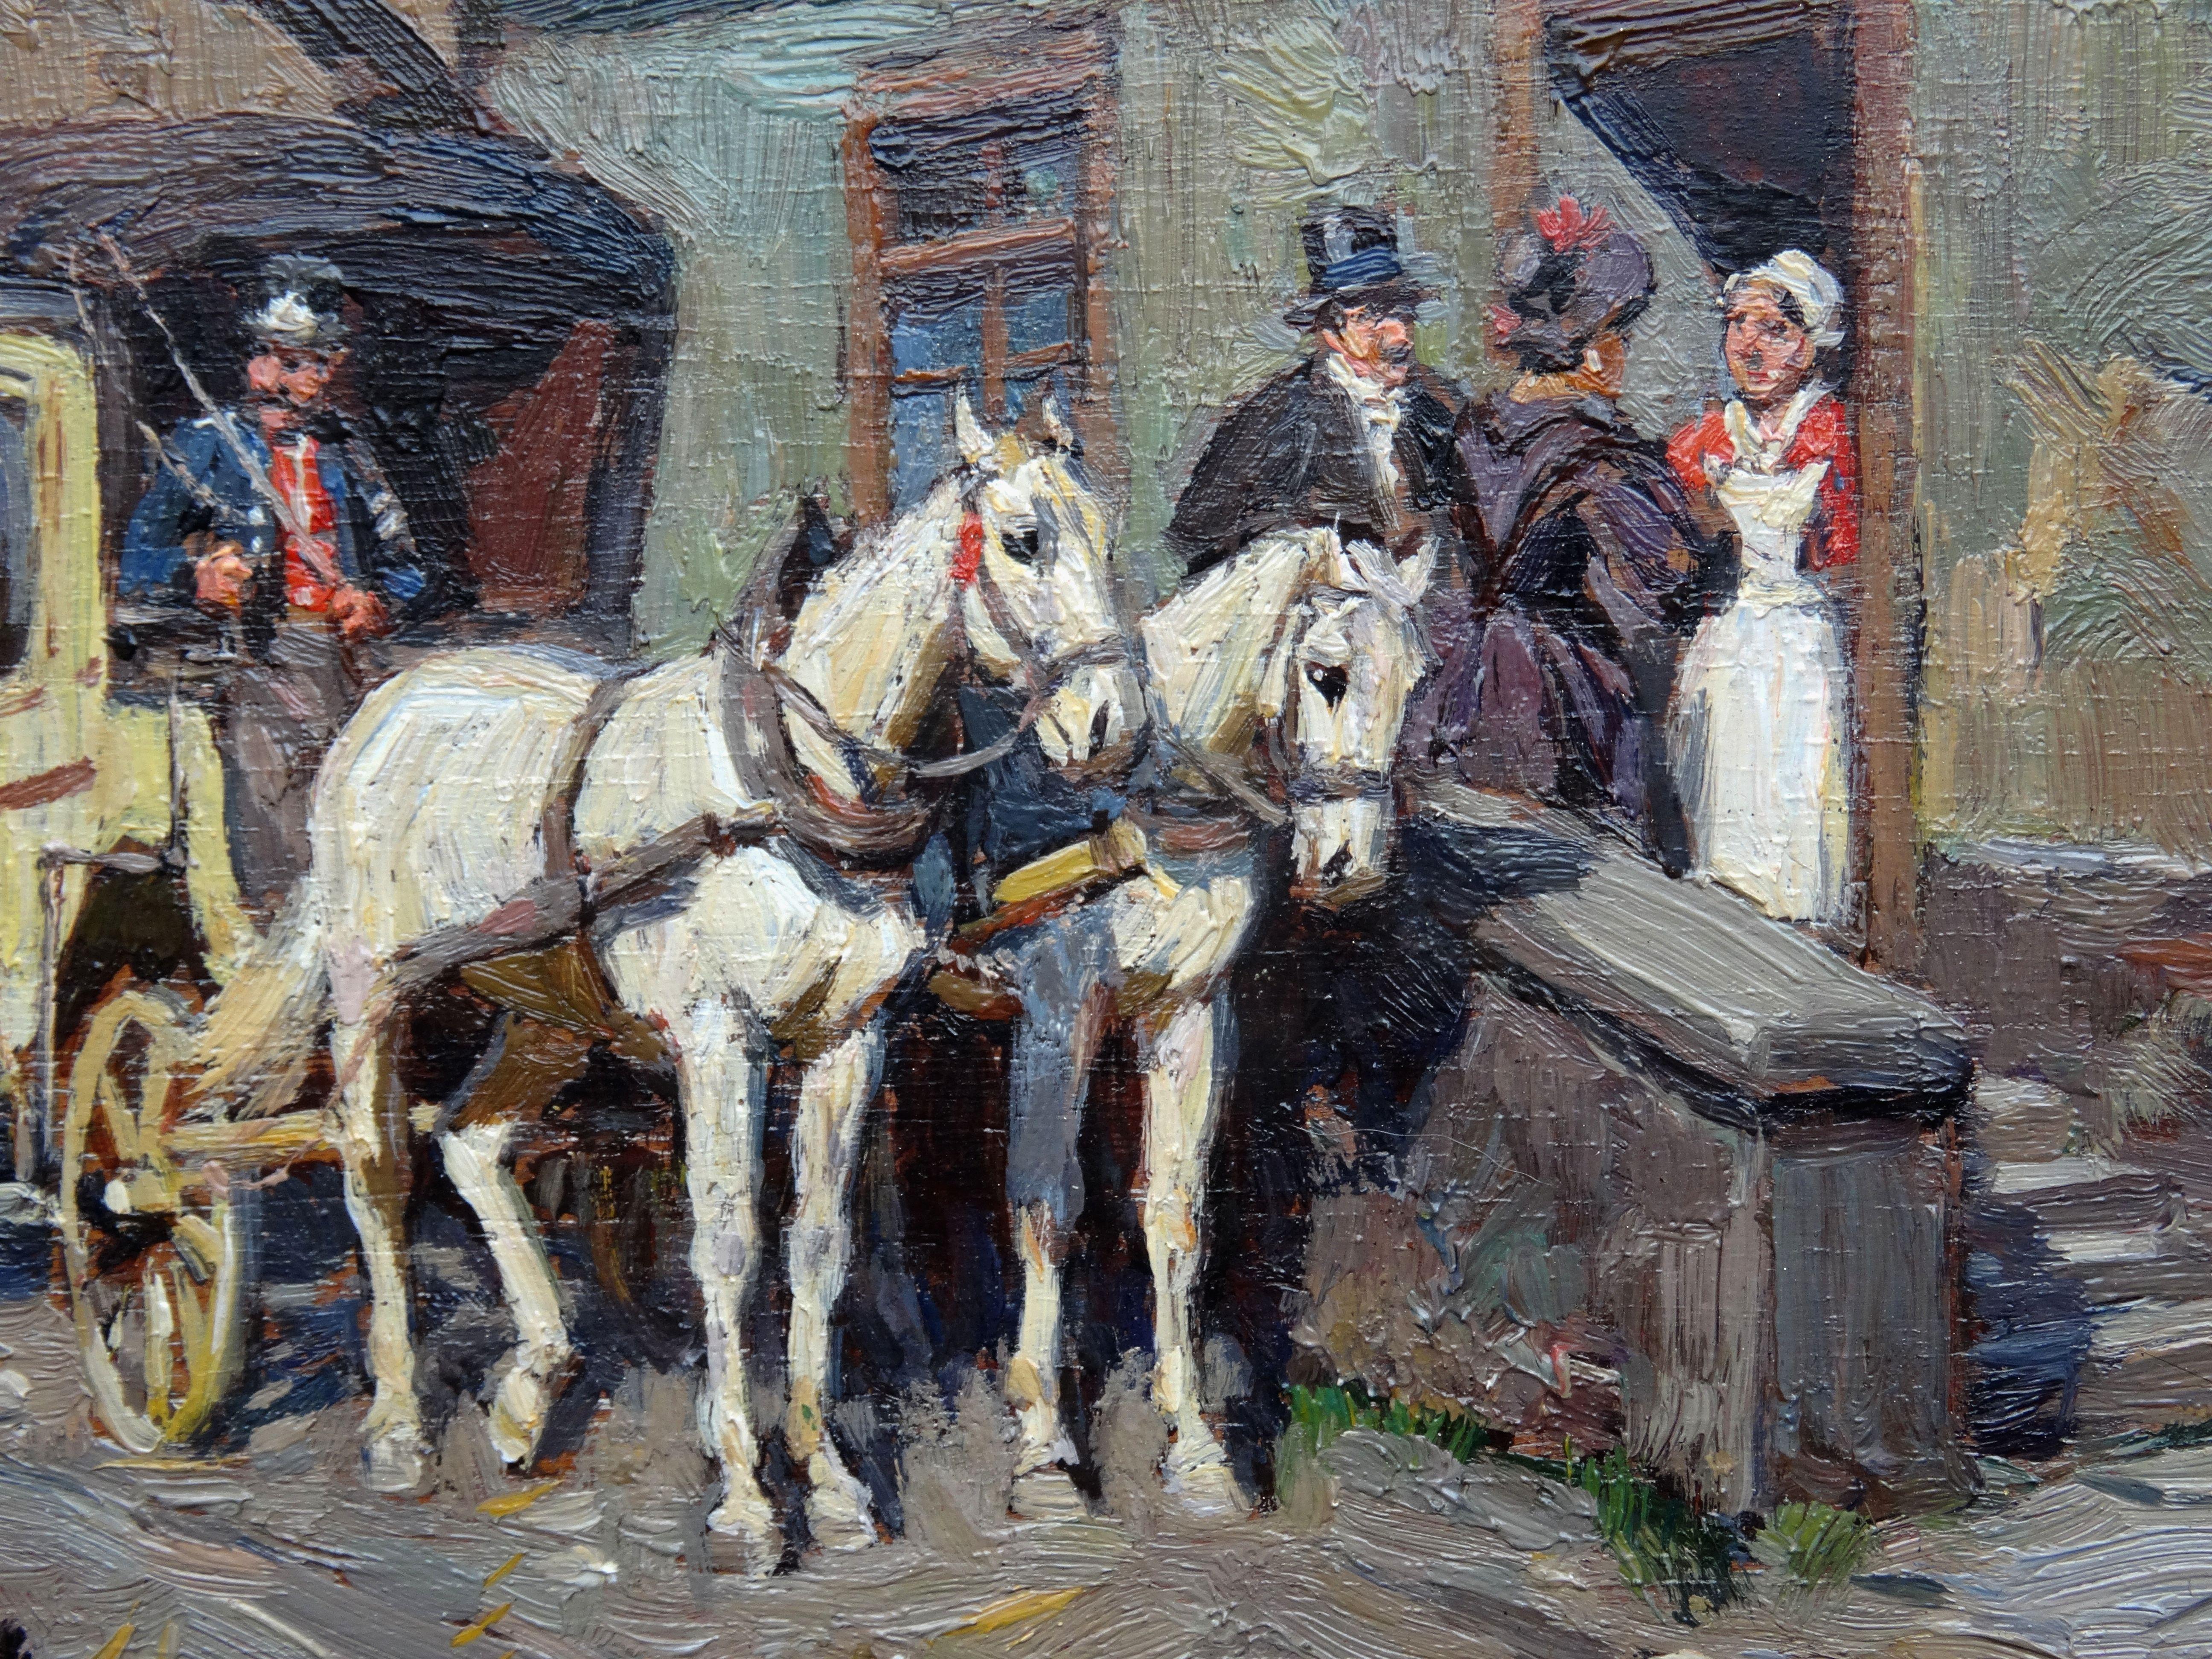 Horses with carriage. Oil on panel. 16.1 x 24.2 cm - Painting by Wilhelm Velten